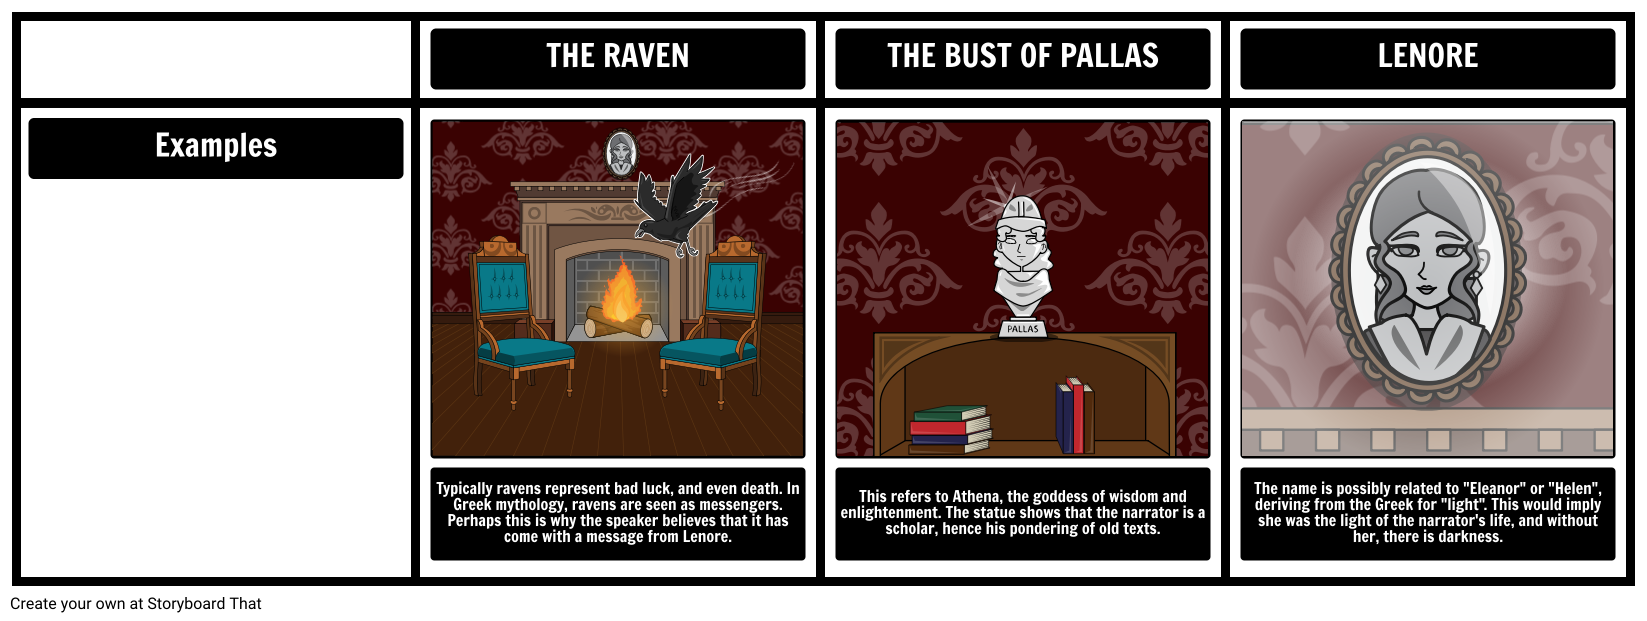 symbolism in  the raven